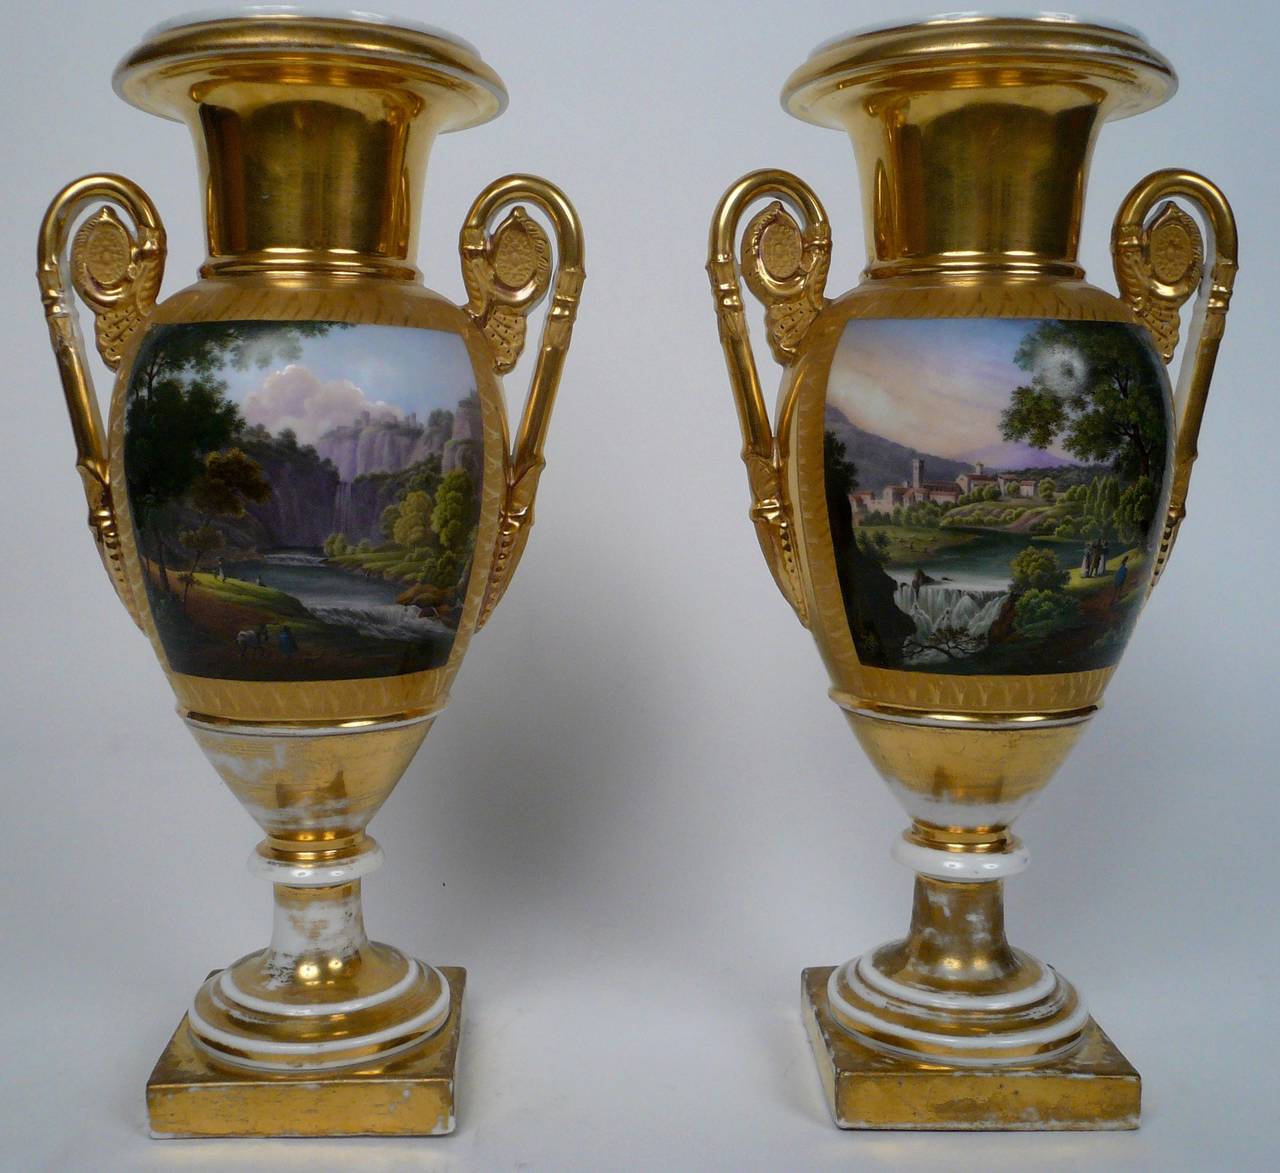 Neoclassical Pair of 19th Century Old Paris Porcelain Urns, Signed L. Brochart